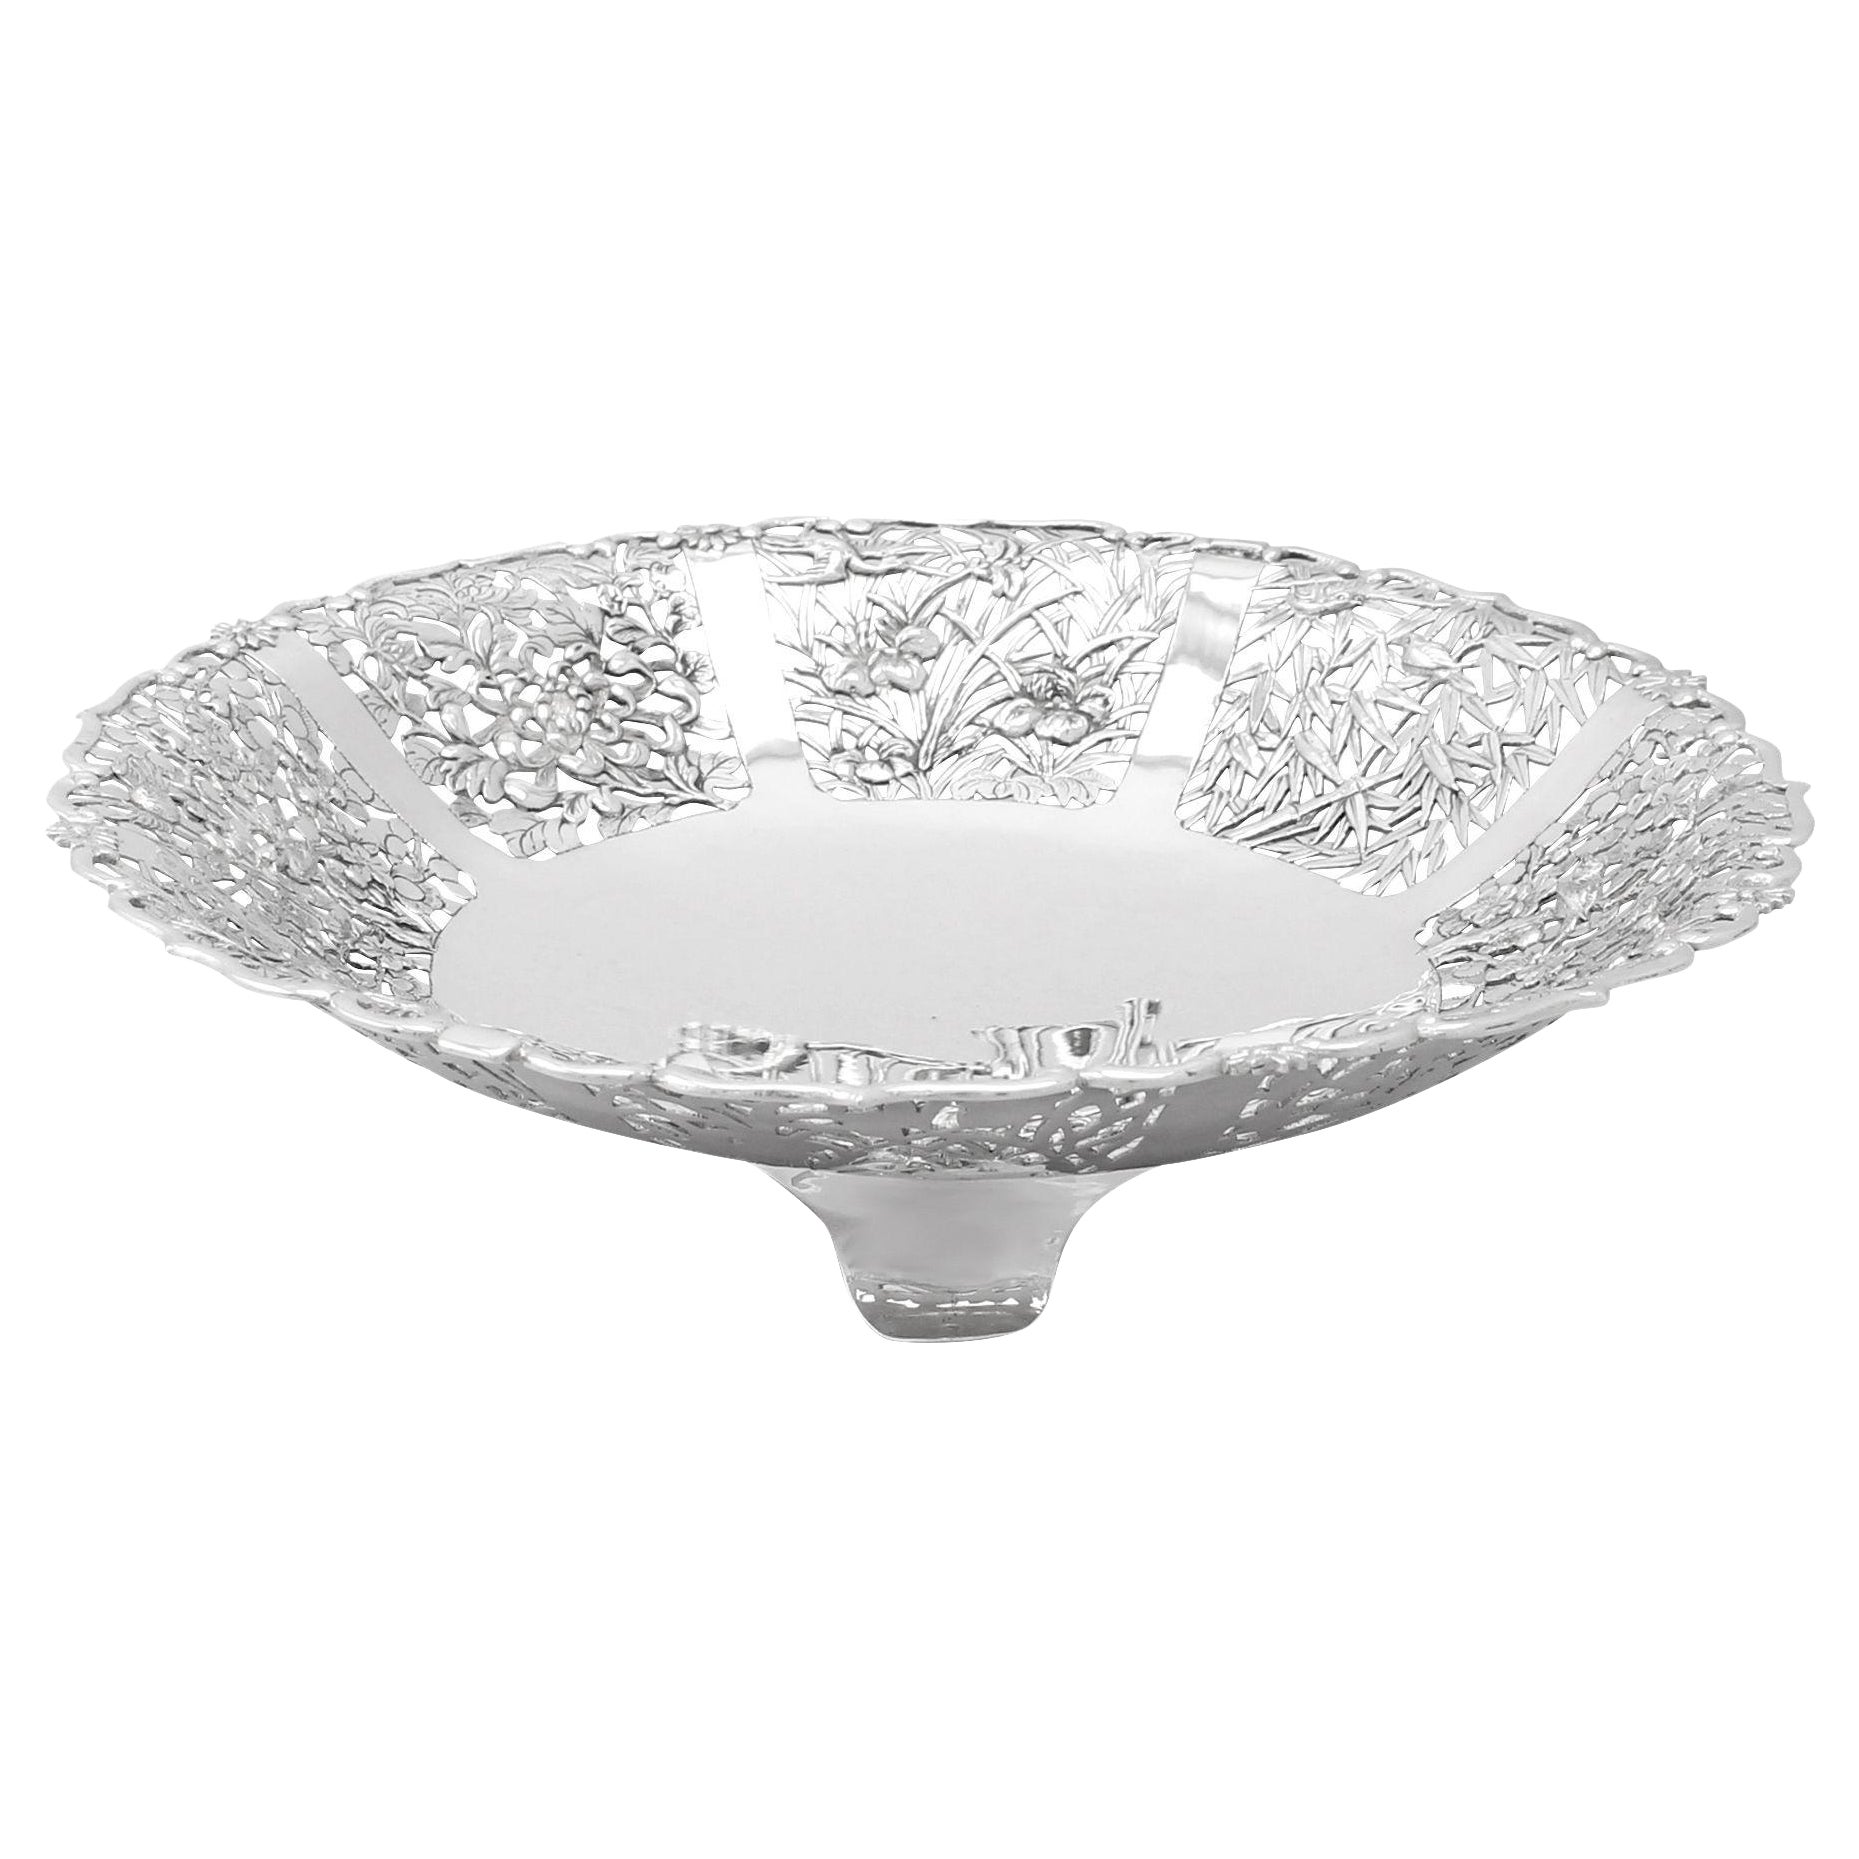 Antique 1880s Chinese Export Silver Fruit Dish